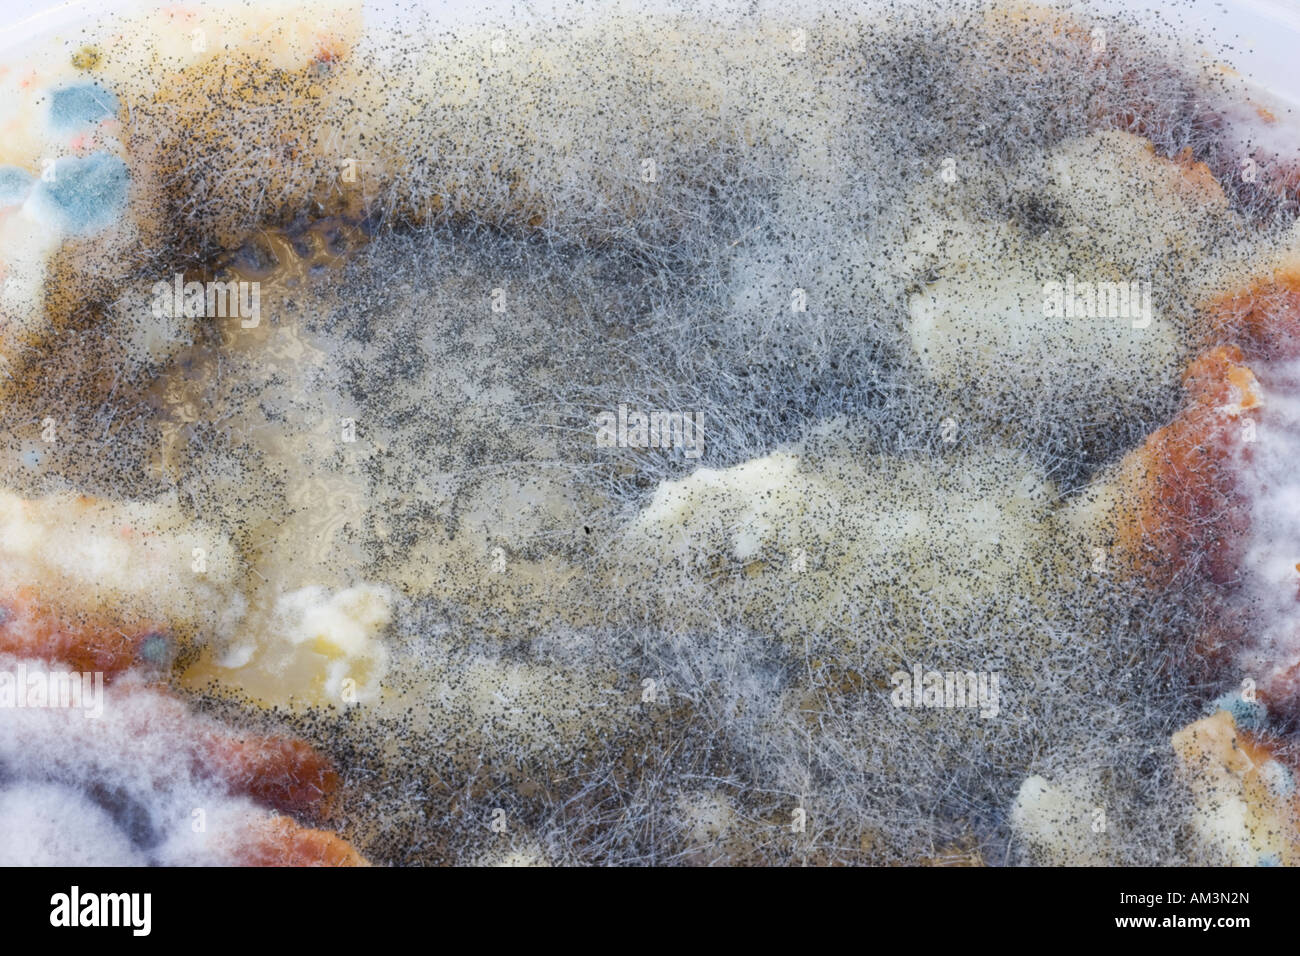 Mould or mold growing on surface of food left in plastic dish Stock Photo